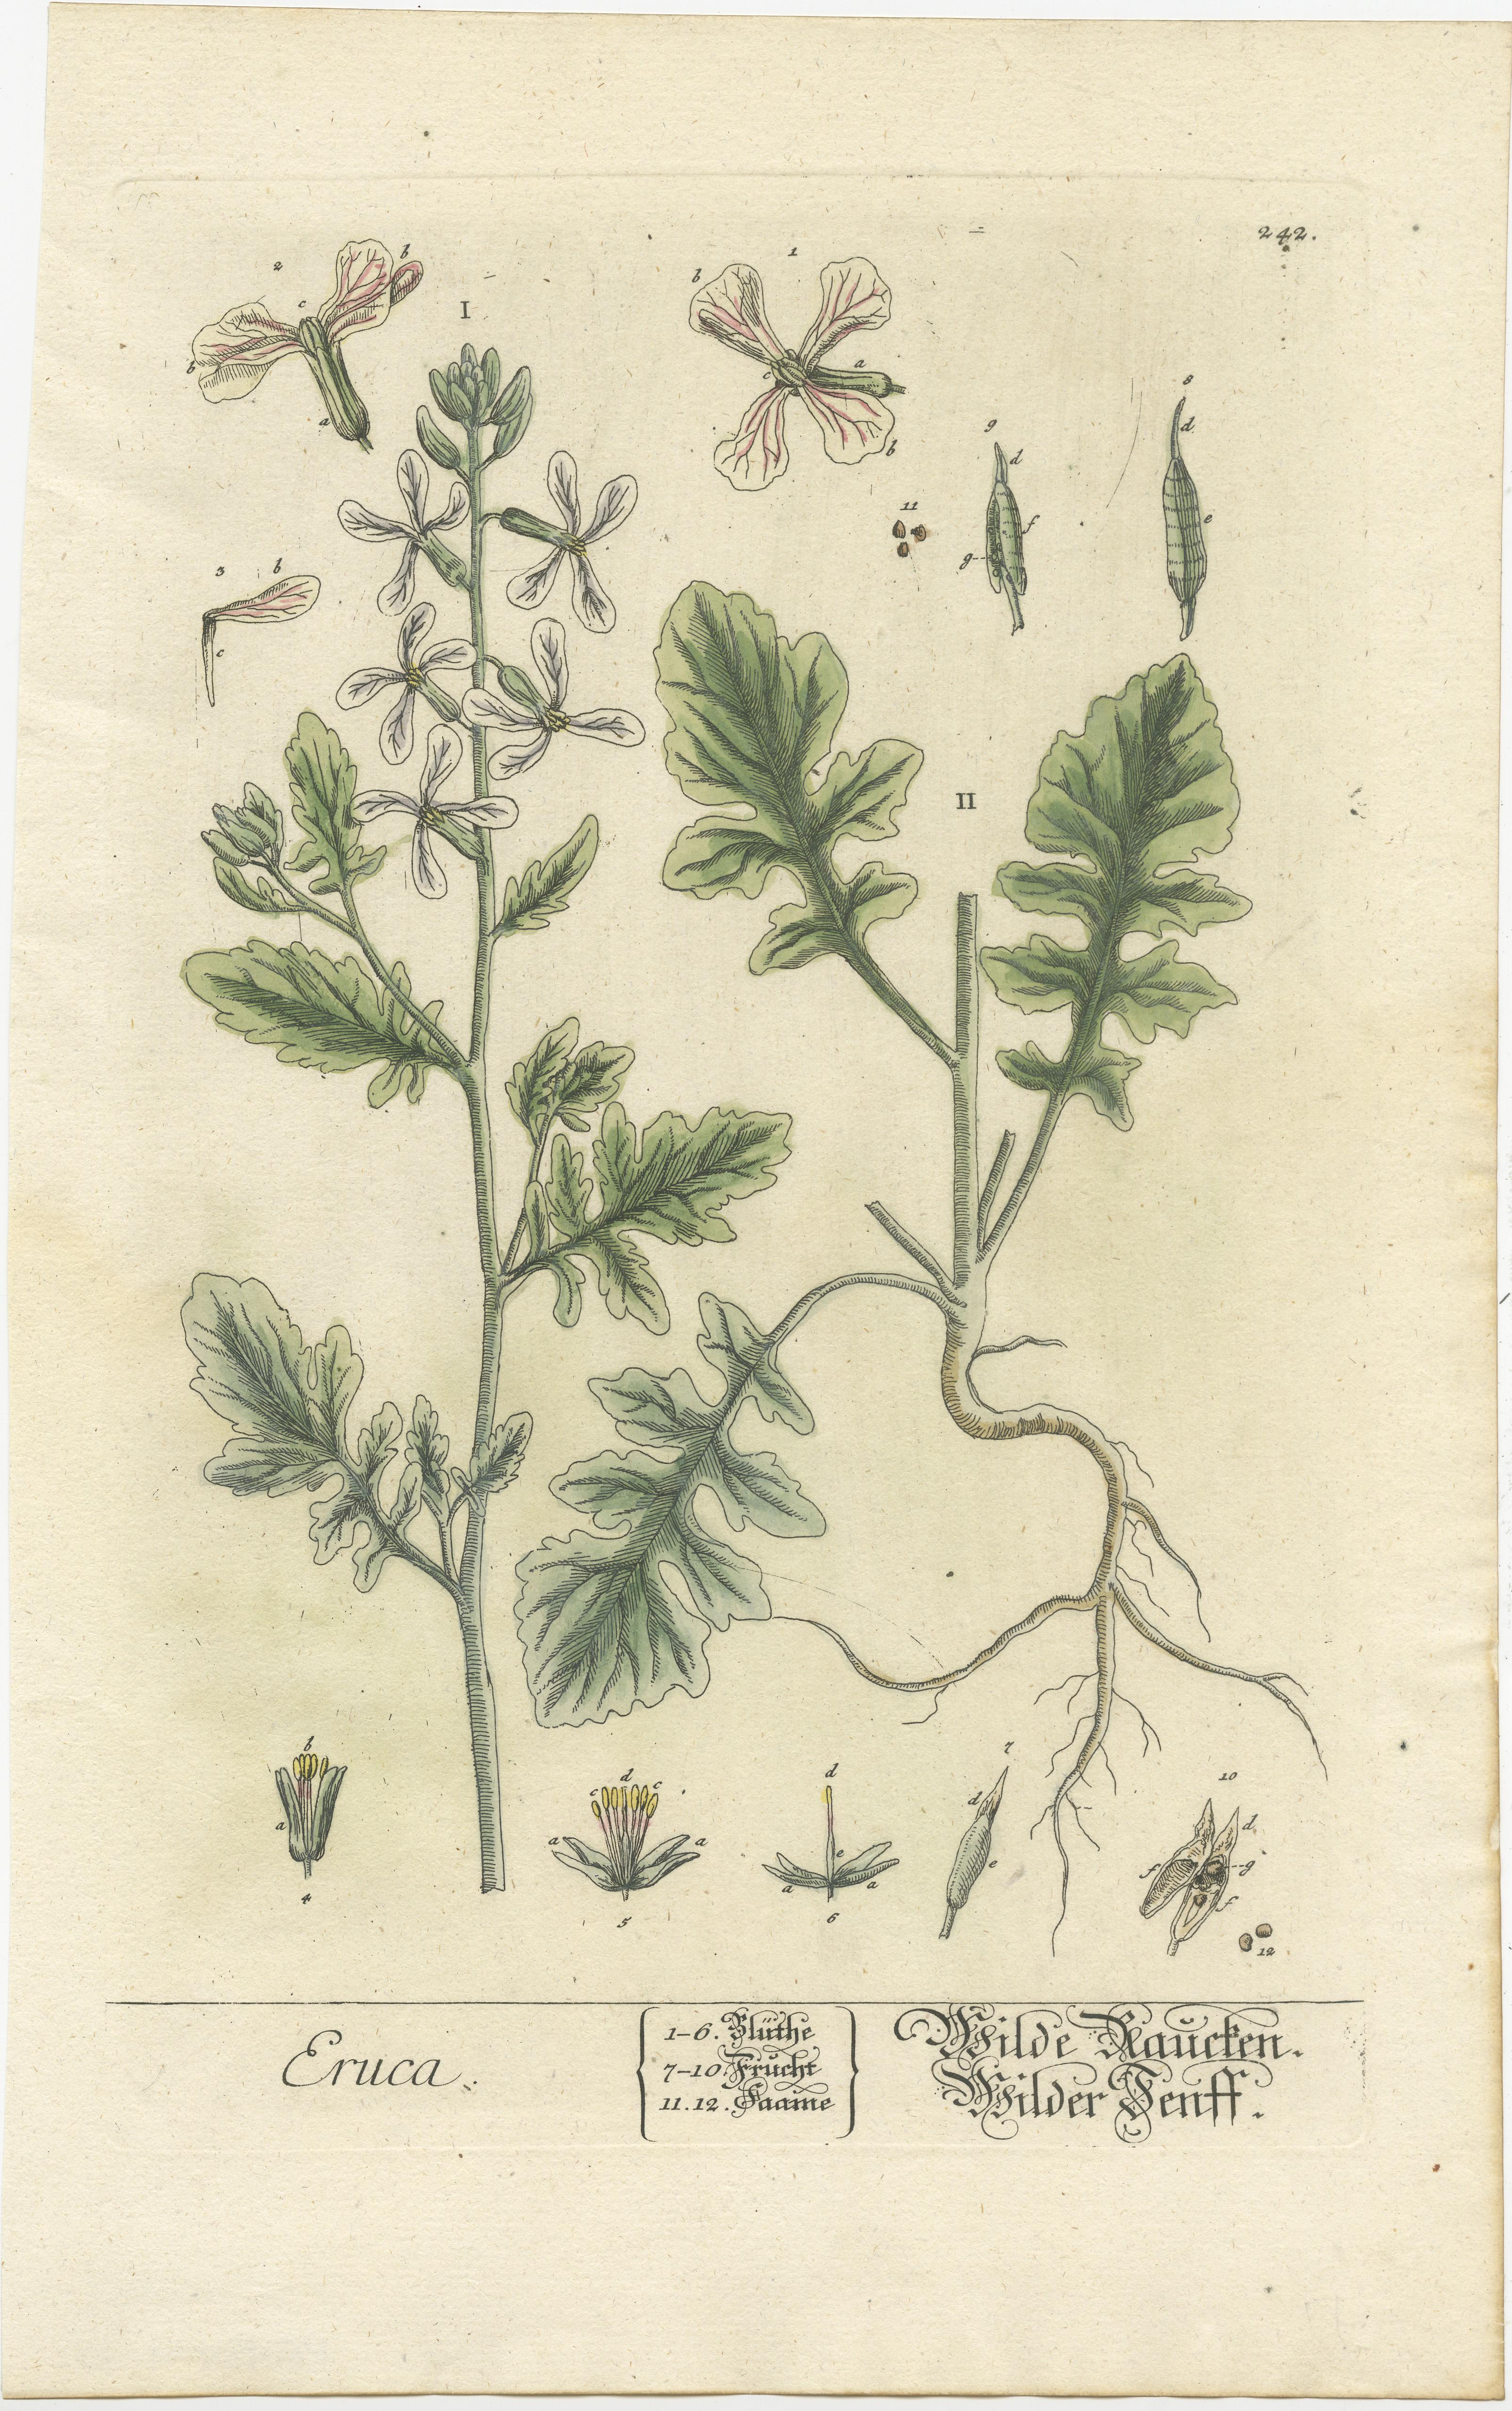 Antique print titled 'Eruca'. Botanical print of Eruca, a genus of flowering plants. Published by or after Elisabeth Blackwell, circa 1750. 